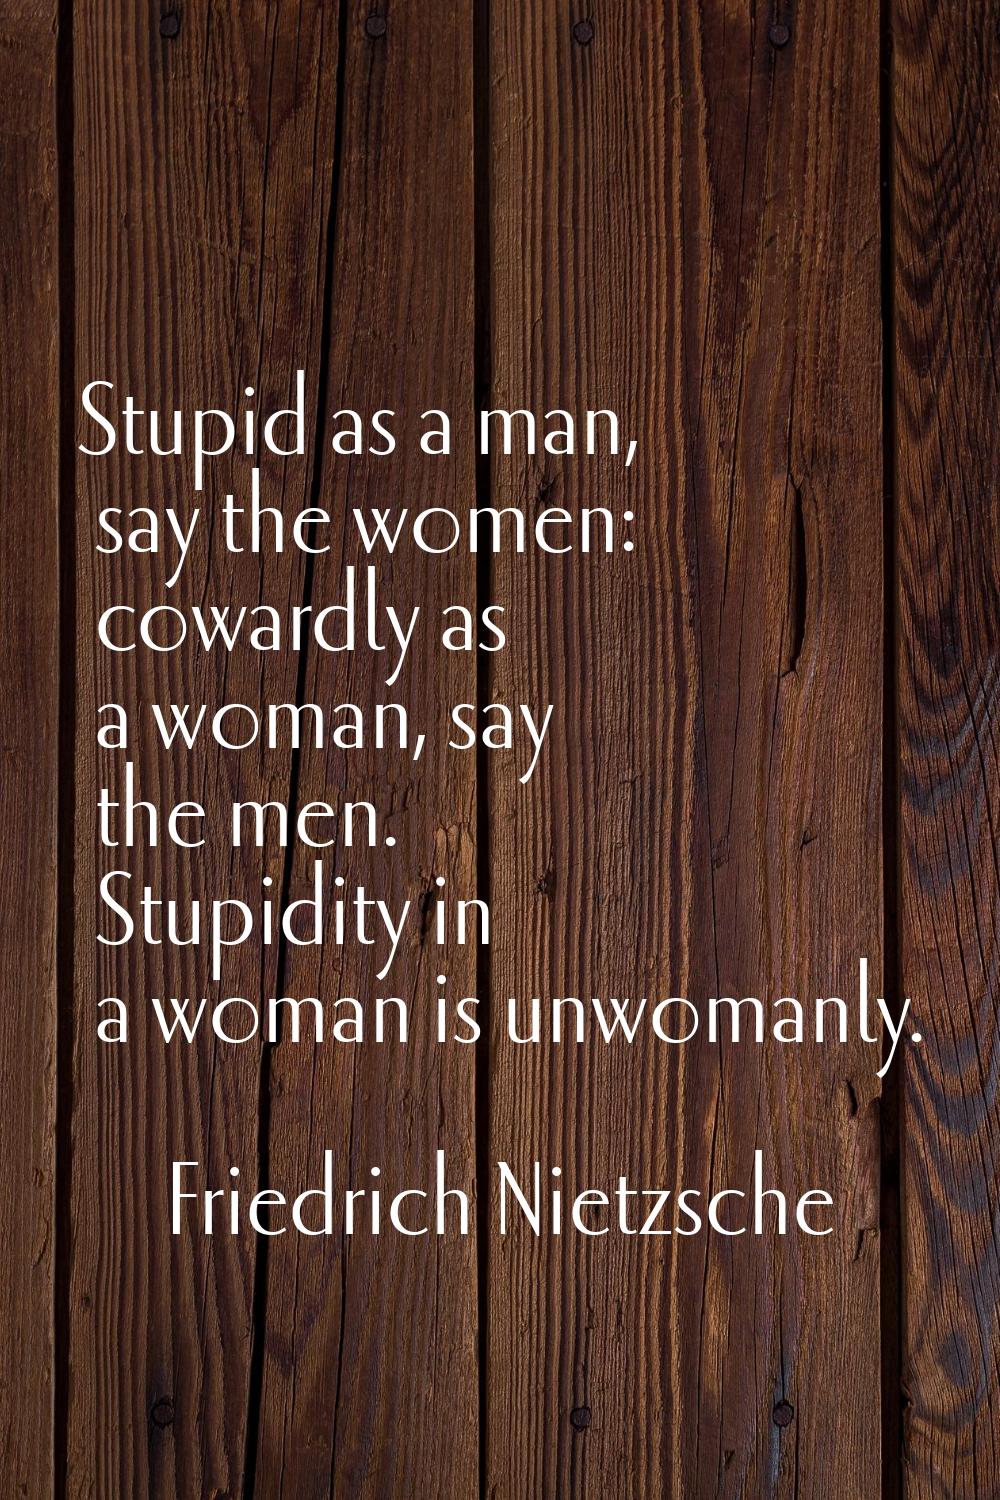 Stupid as a man, say the women: cowardly as a woman, say the men. Stupidity in a woman is unwomanly